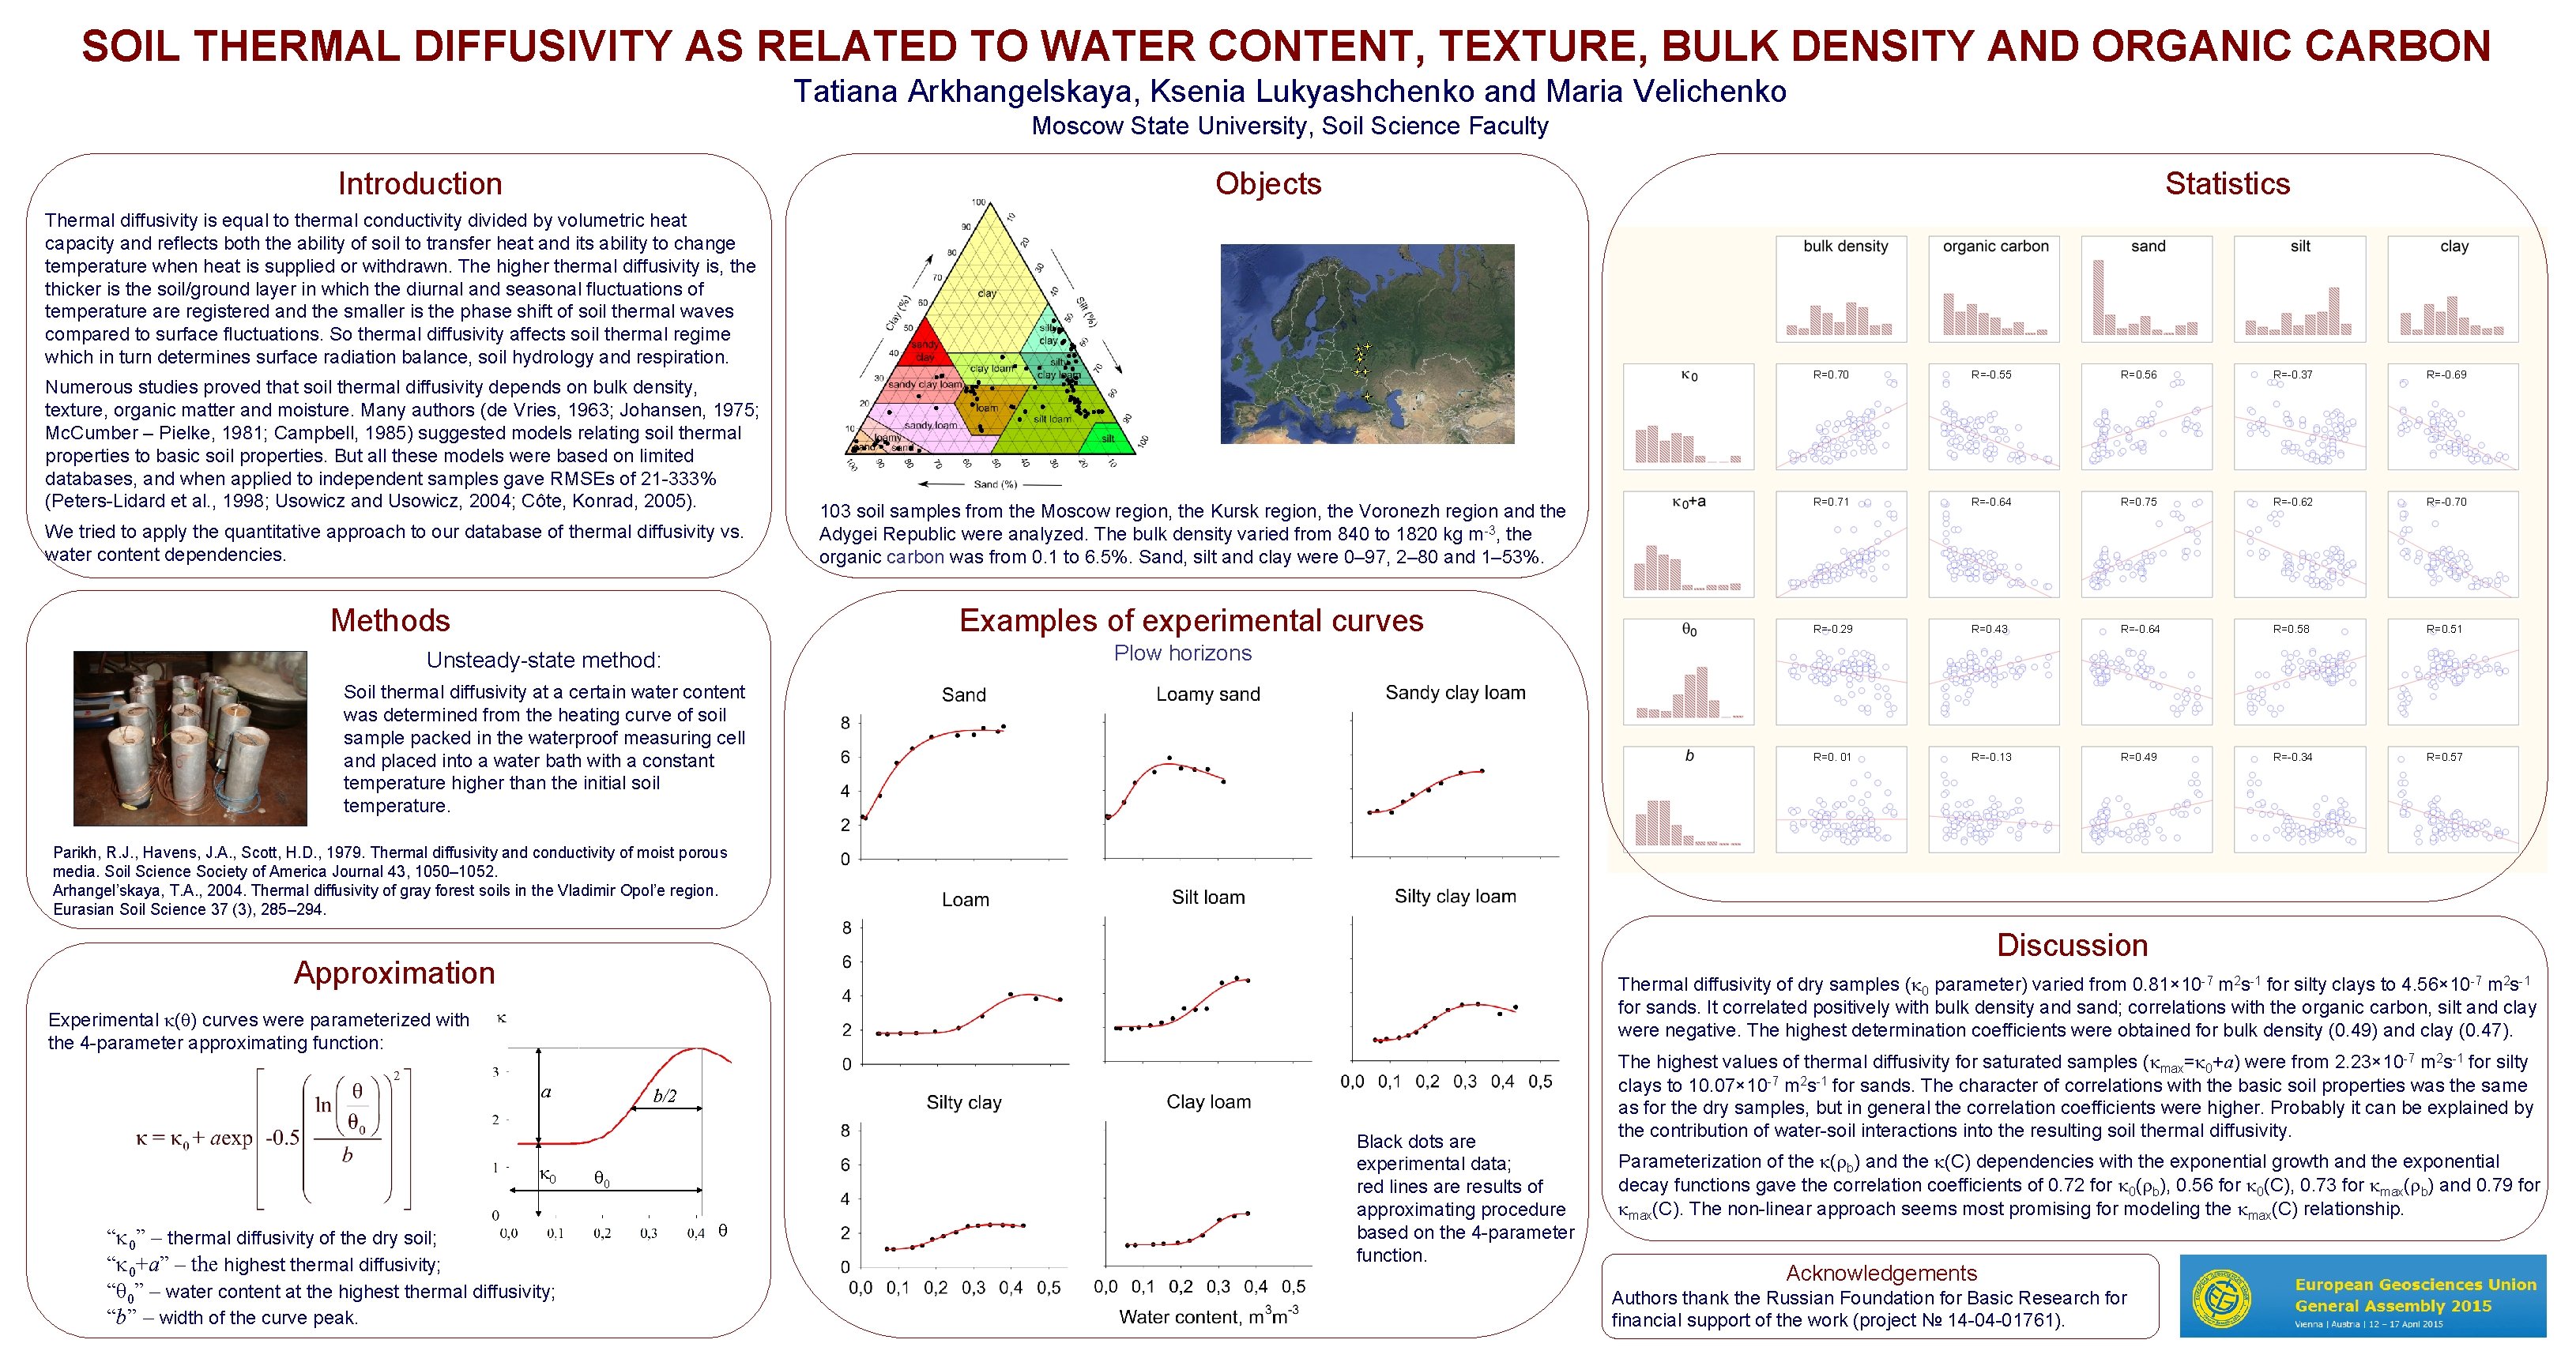 SOIL THERMAL DIFFUSIVITY AS RELATED TO WATER CONTENT, TEXTURE, BULK DENSITY AND ORGANIC CARBON